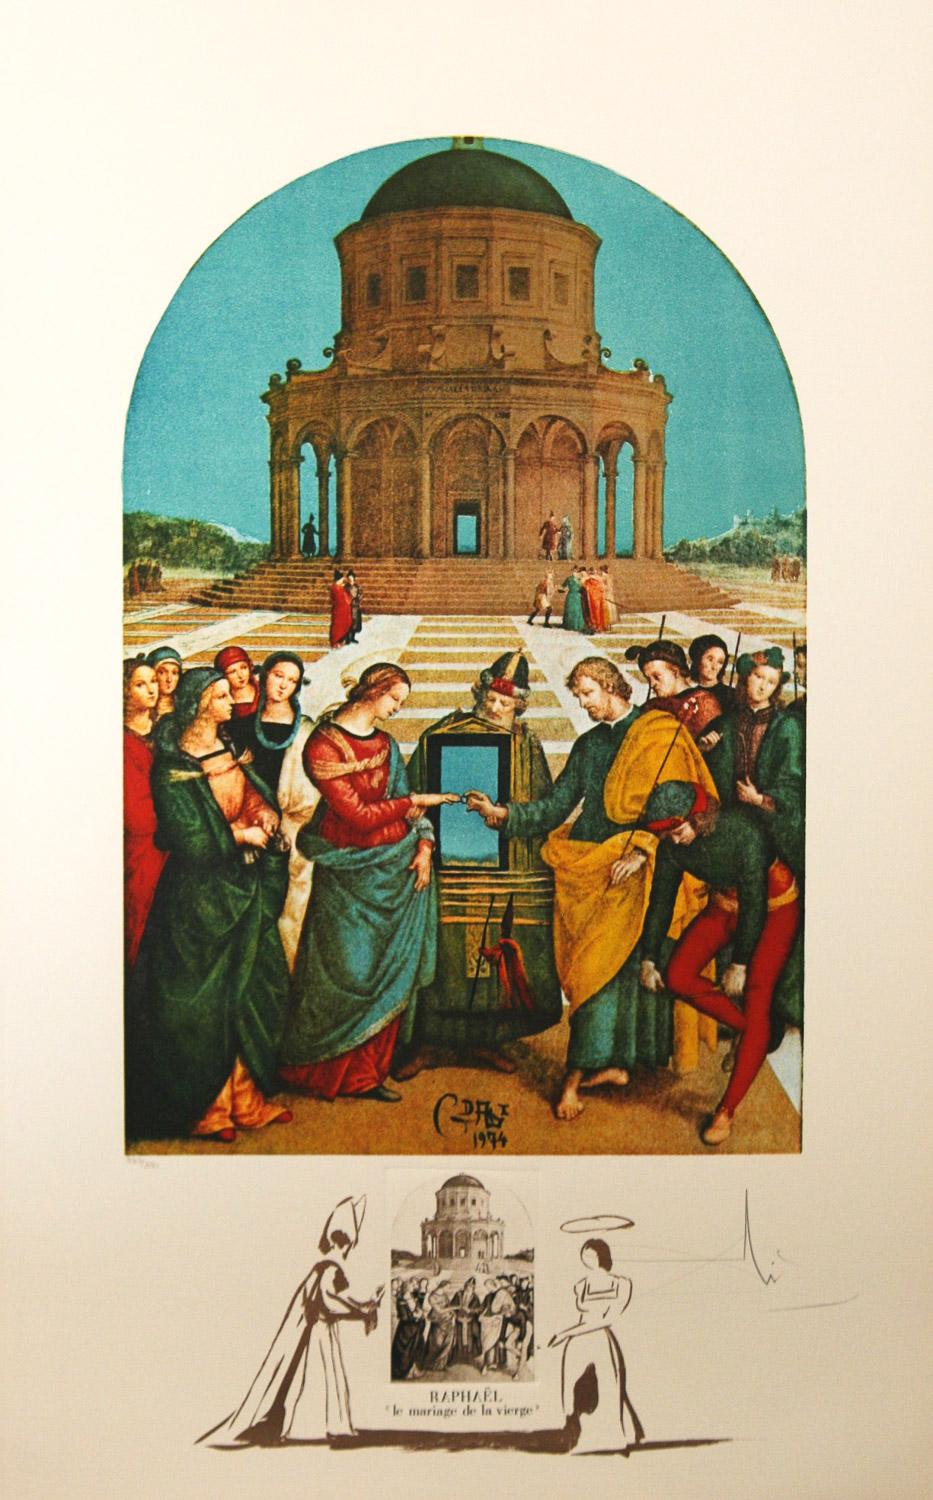 Le Marriage de la Vierge by Salvador Dali Changes in Great Masterpieces Framed - Print by Salvador Dalí